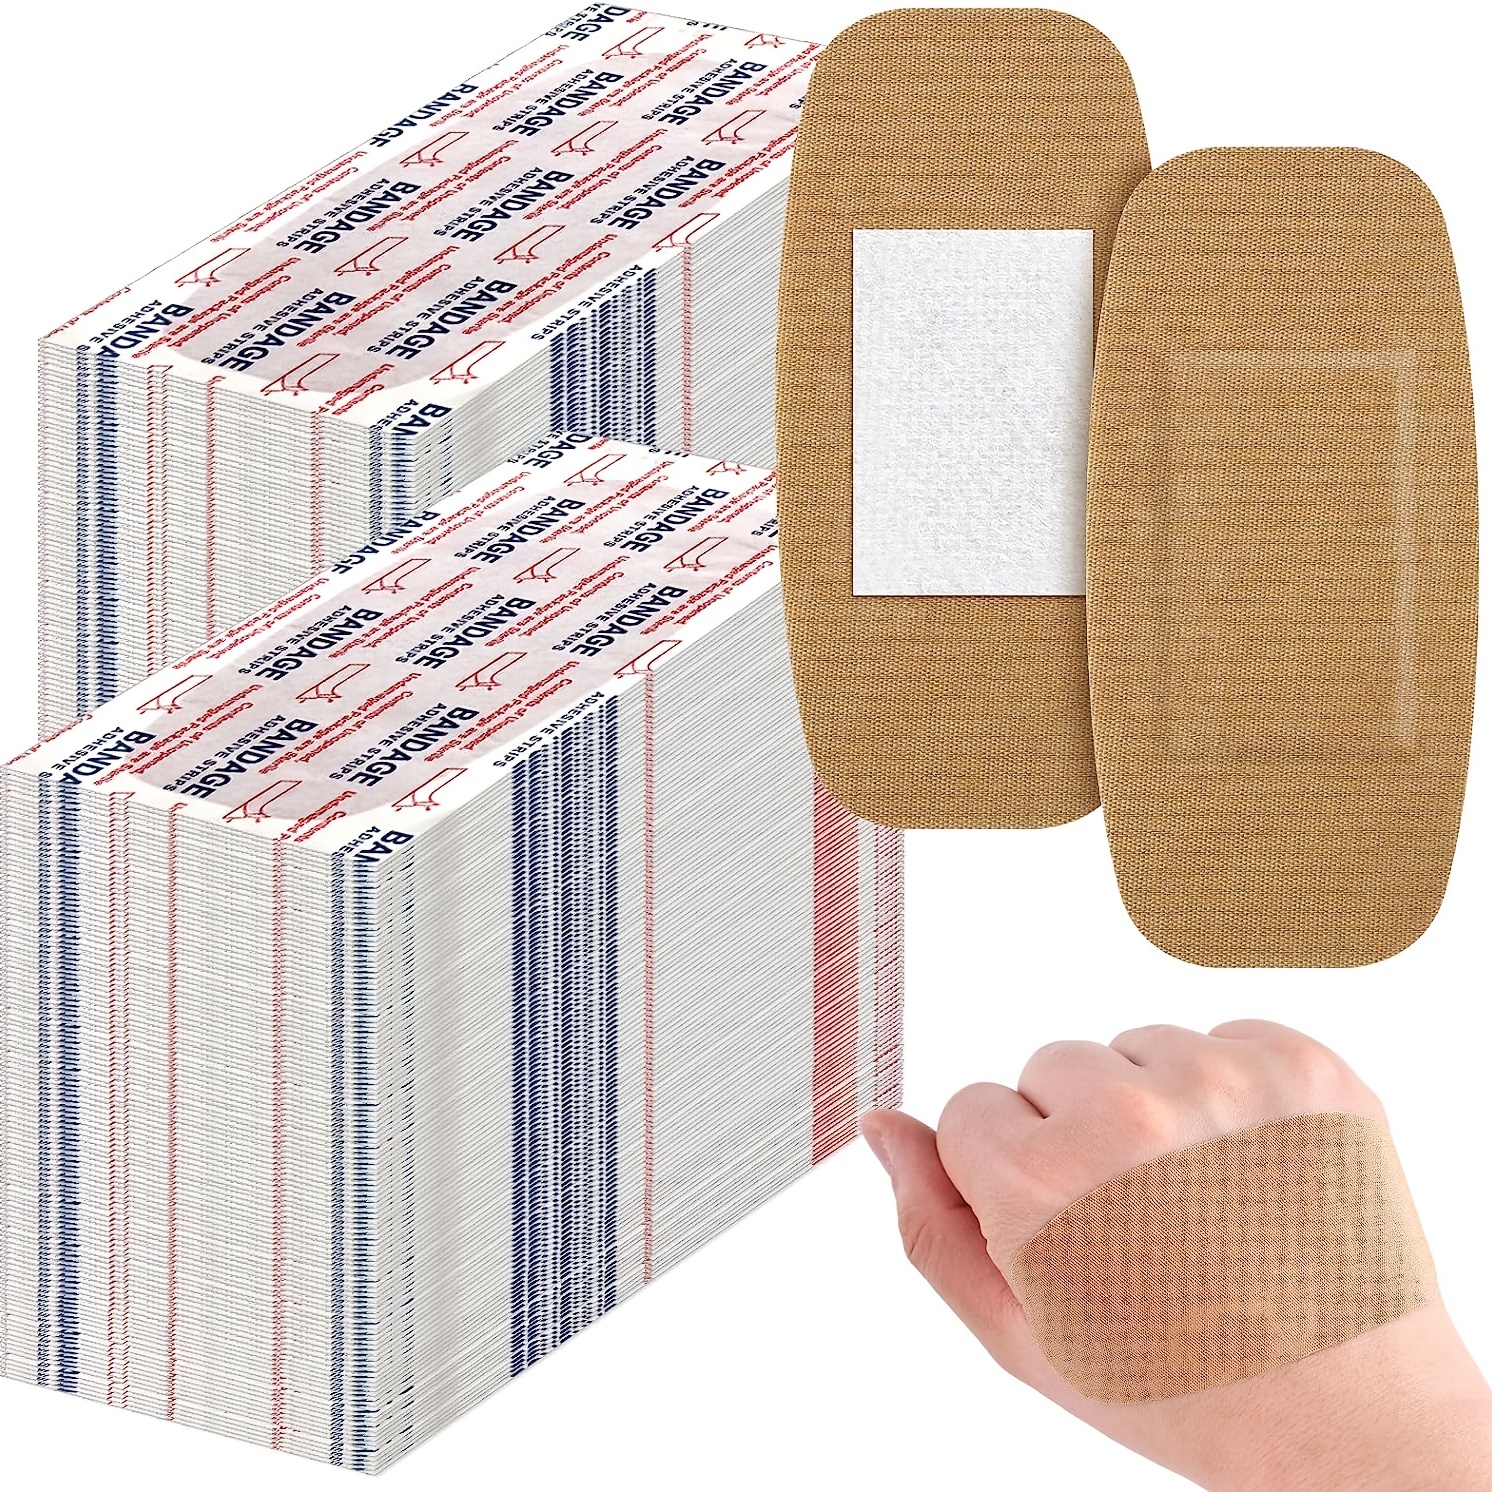 10Pcs Waterproof Antibacterial Band Aid Butterfly Shaped Wound Dressing for  Home Travel first aid supplies Emergency